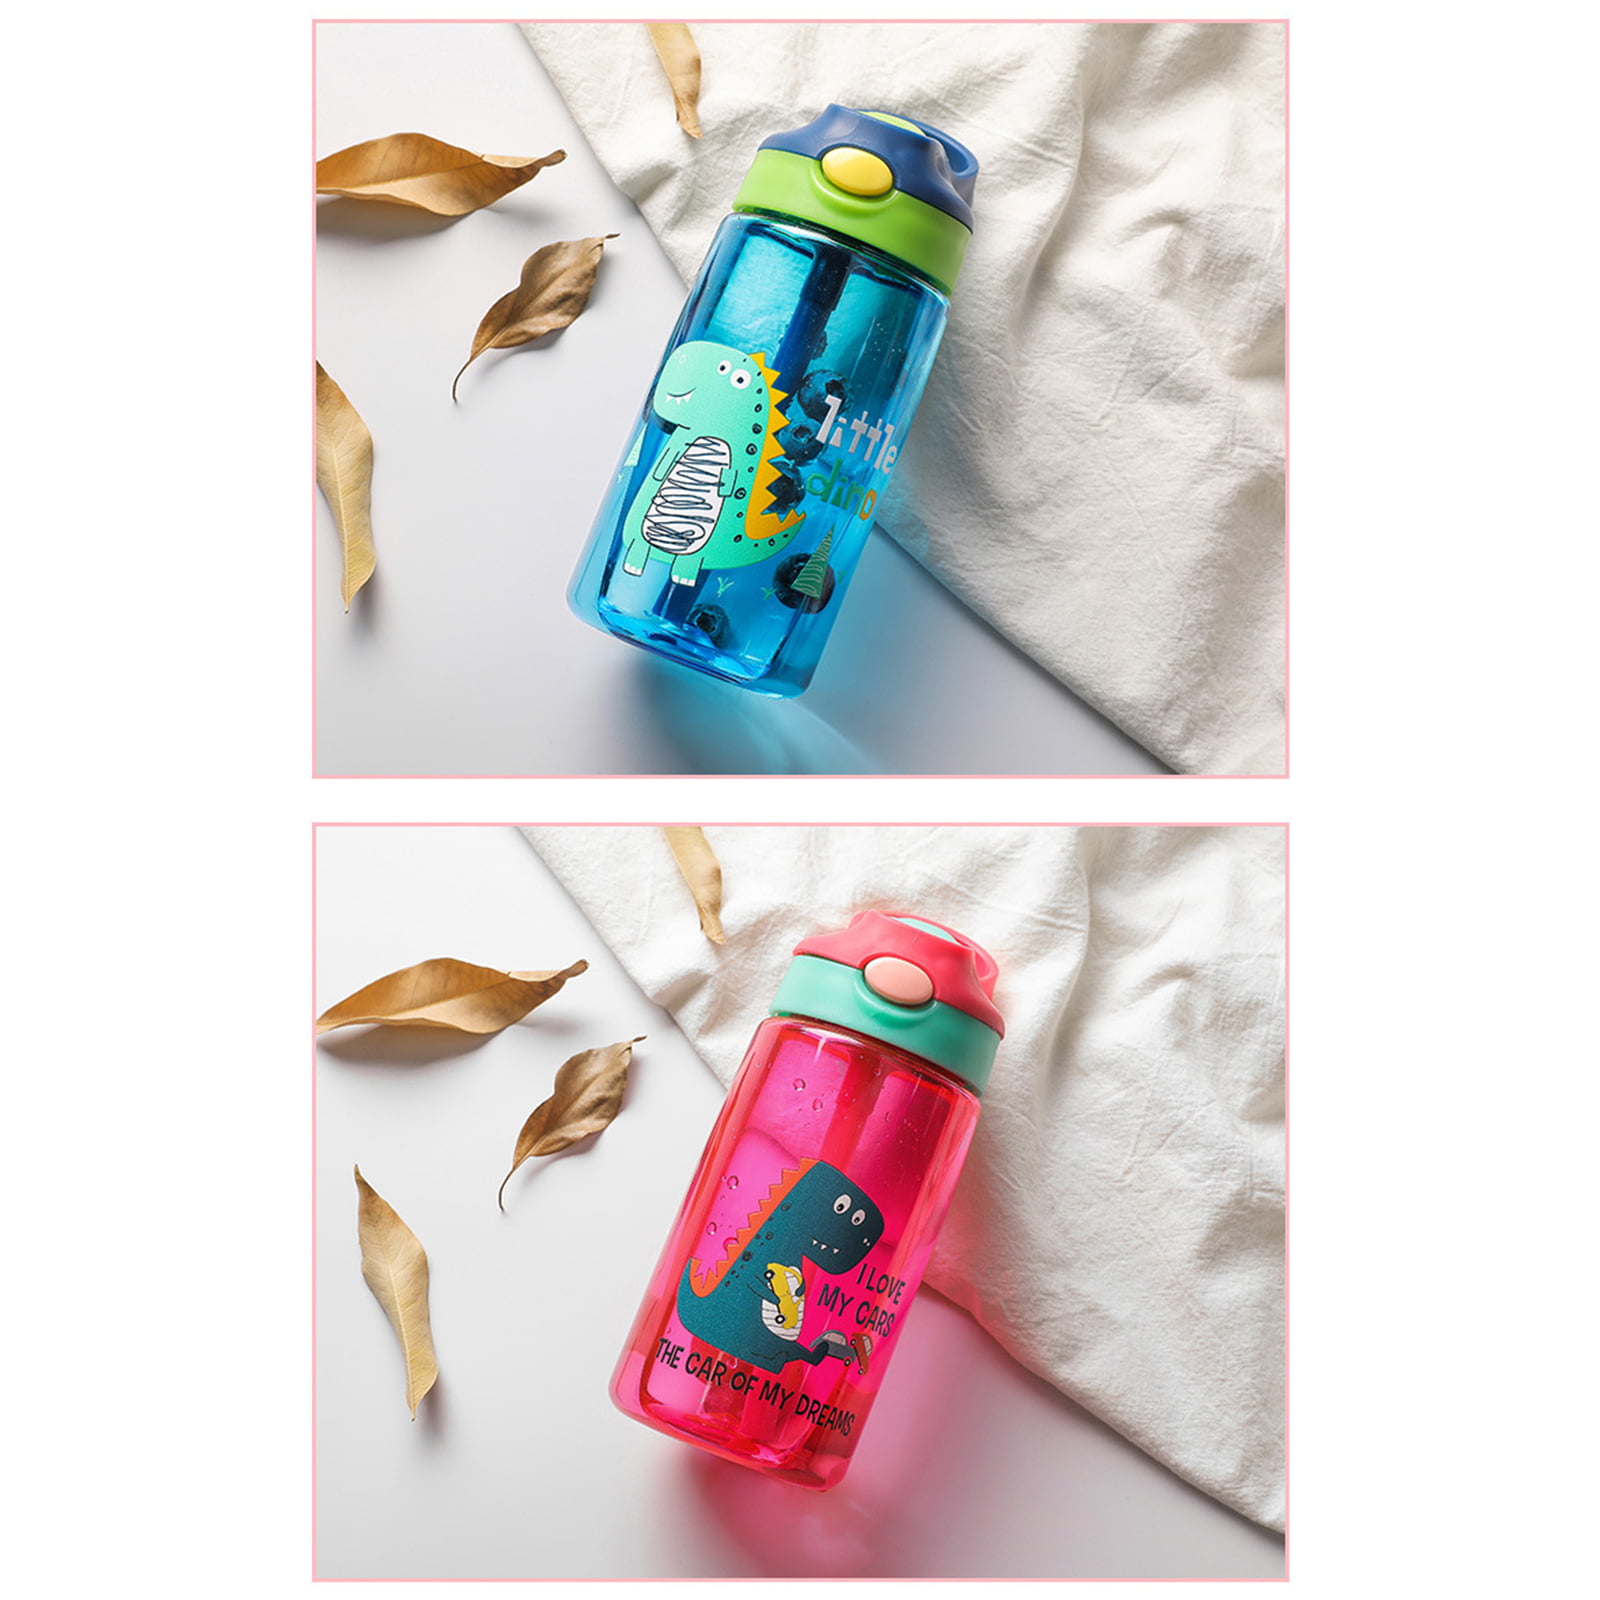 ROISDIYI Kids Water Bottle with Straw Spill Proof Toddler Water